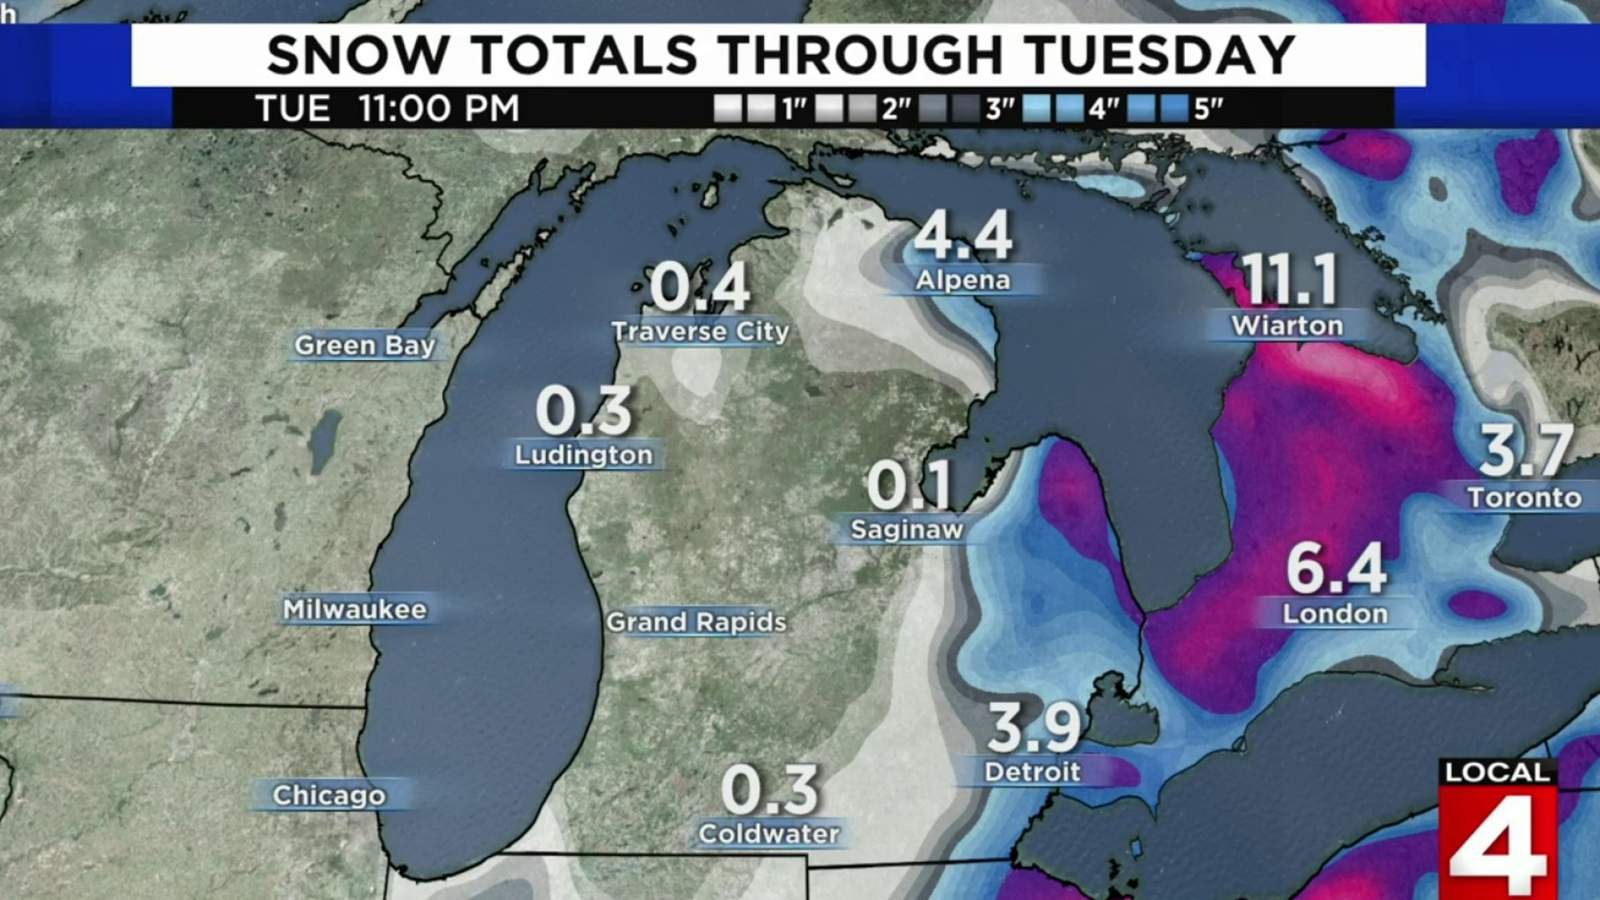 Michigan winter weather advisory: Several inches of snow expected Monday-Tuesday